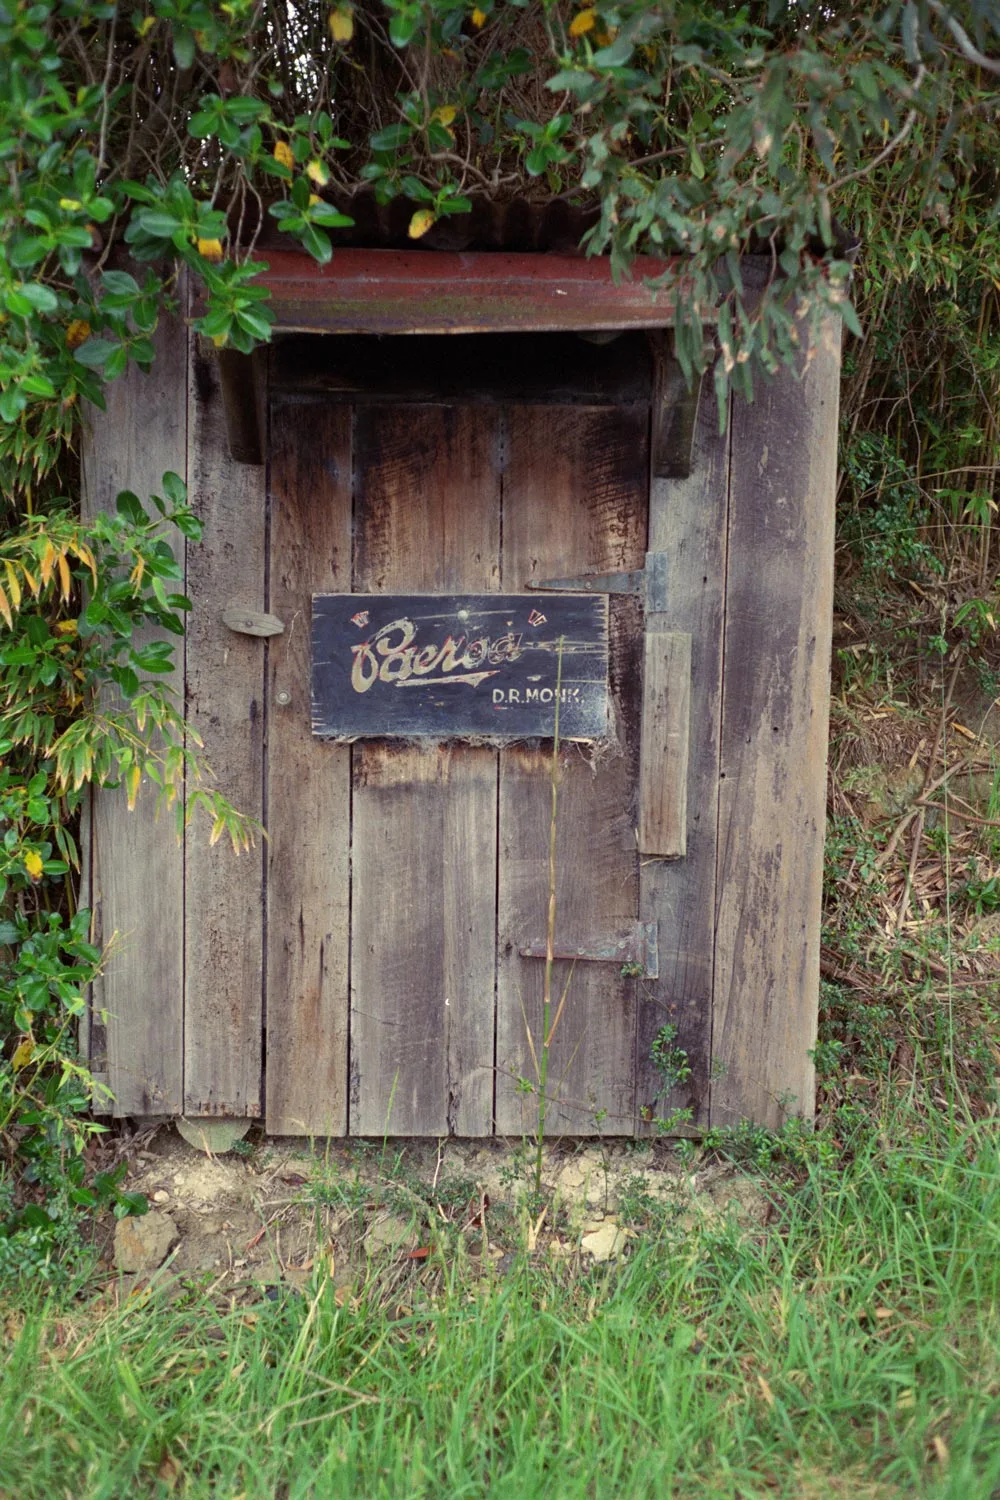 Letterbox at the homestead 'Paeroa' on State Highway 16, Woodhill